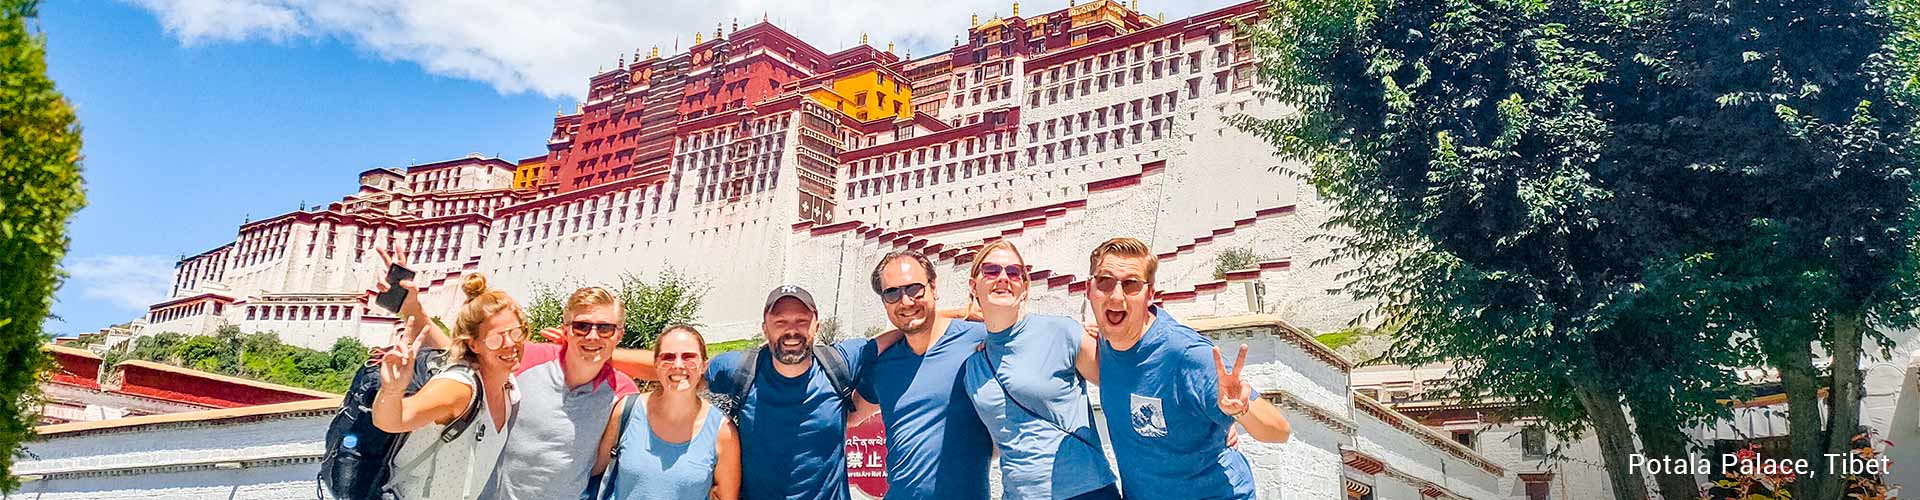 As largest Tibet travel agency, we have best private Tibet tours including Lhasa Private tours, private tours to EBC and Mount Kailash, Tibet trekking tours and private Tibet Nepal tours.